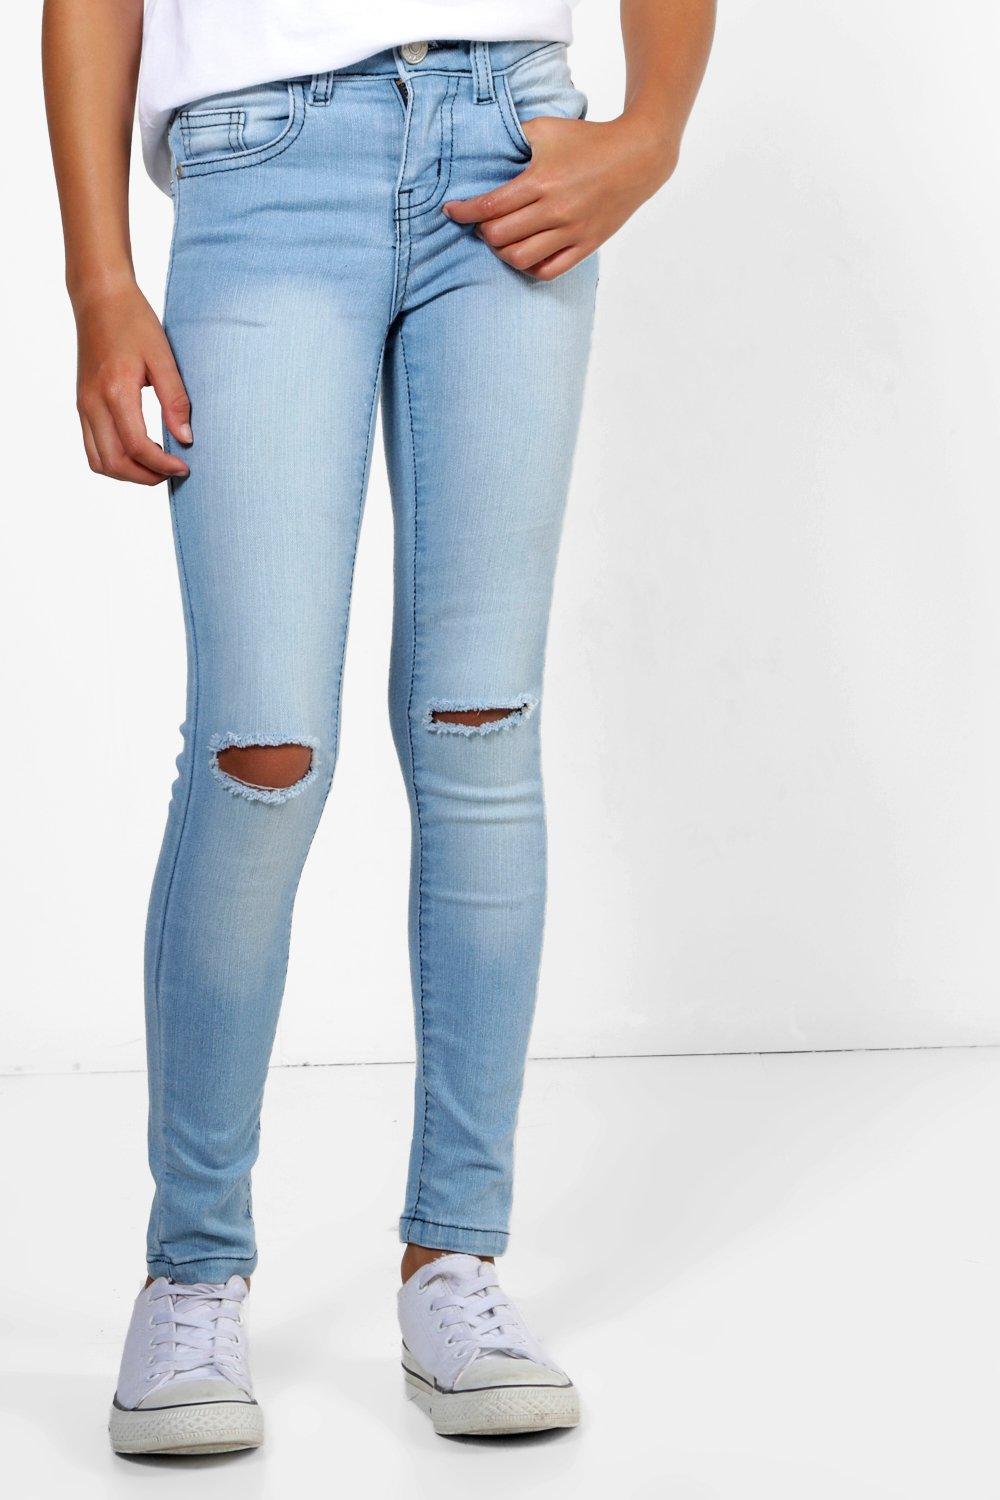 girls ripped knee jeans